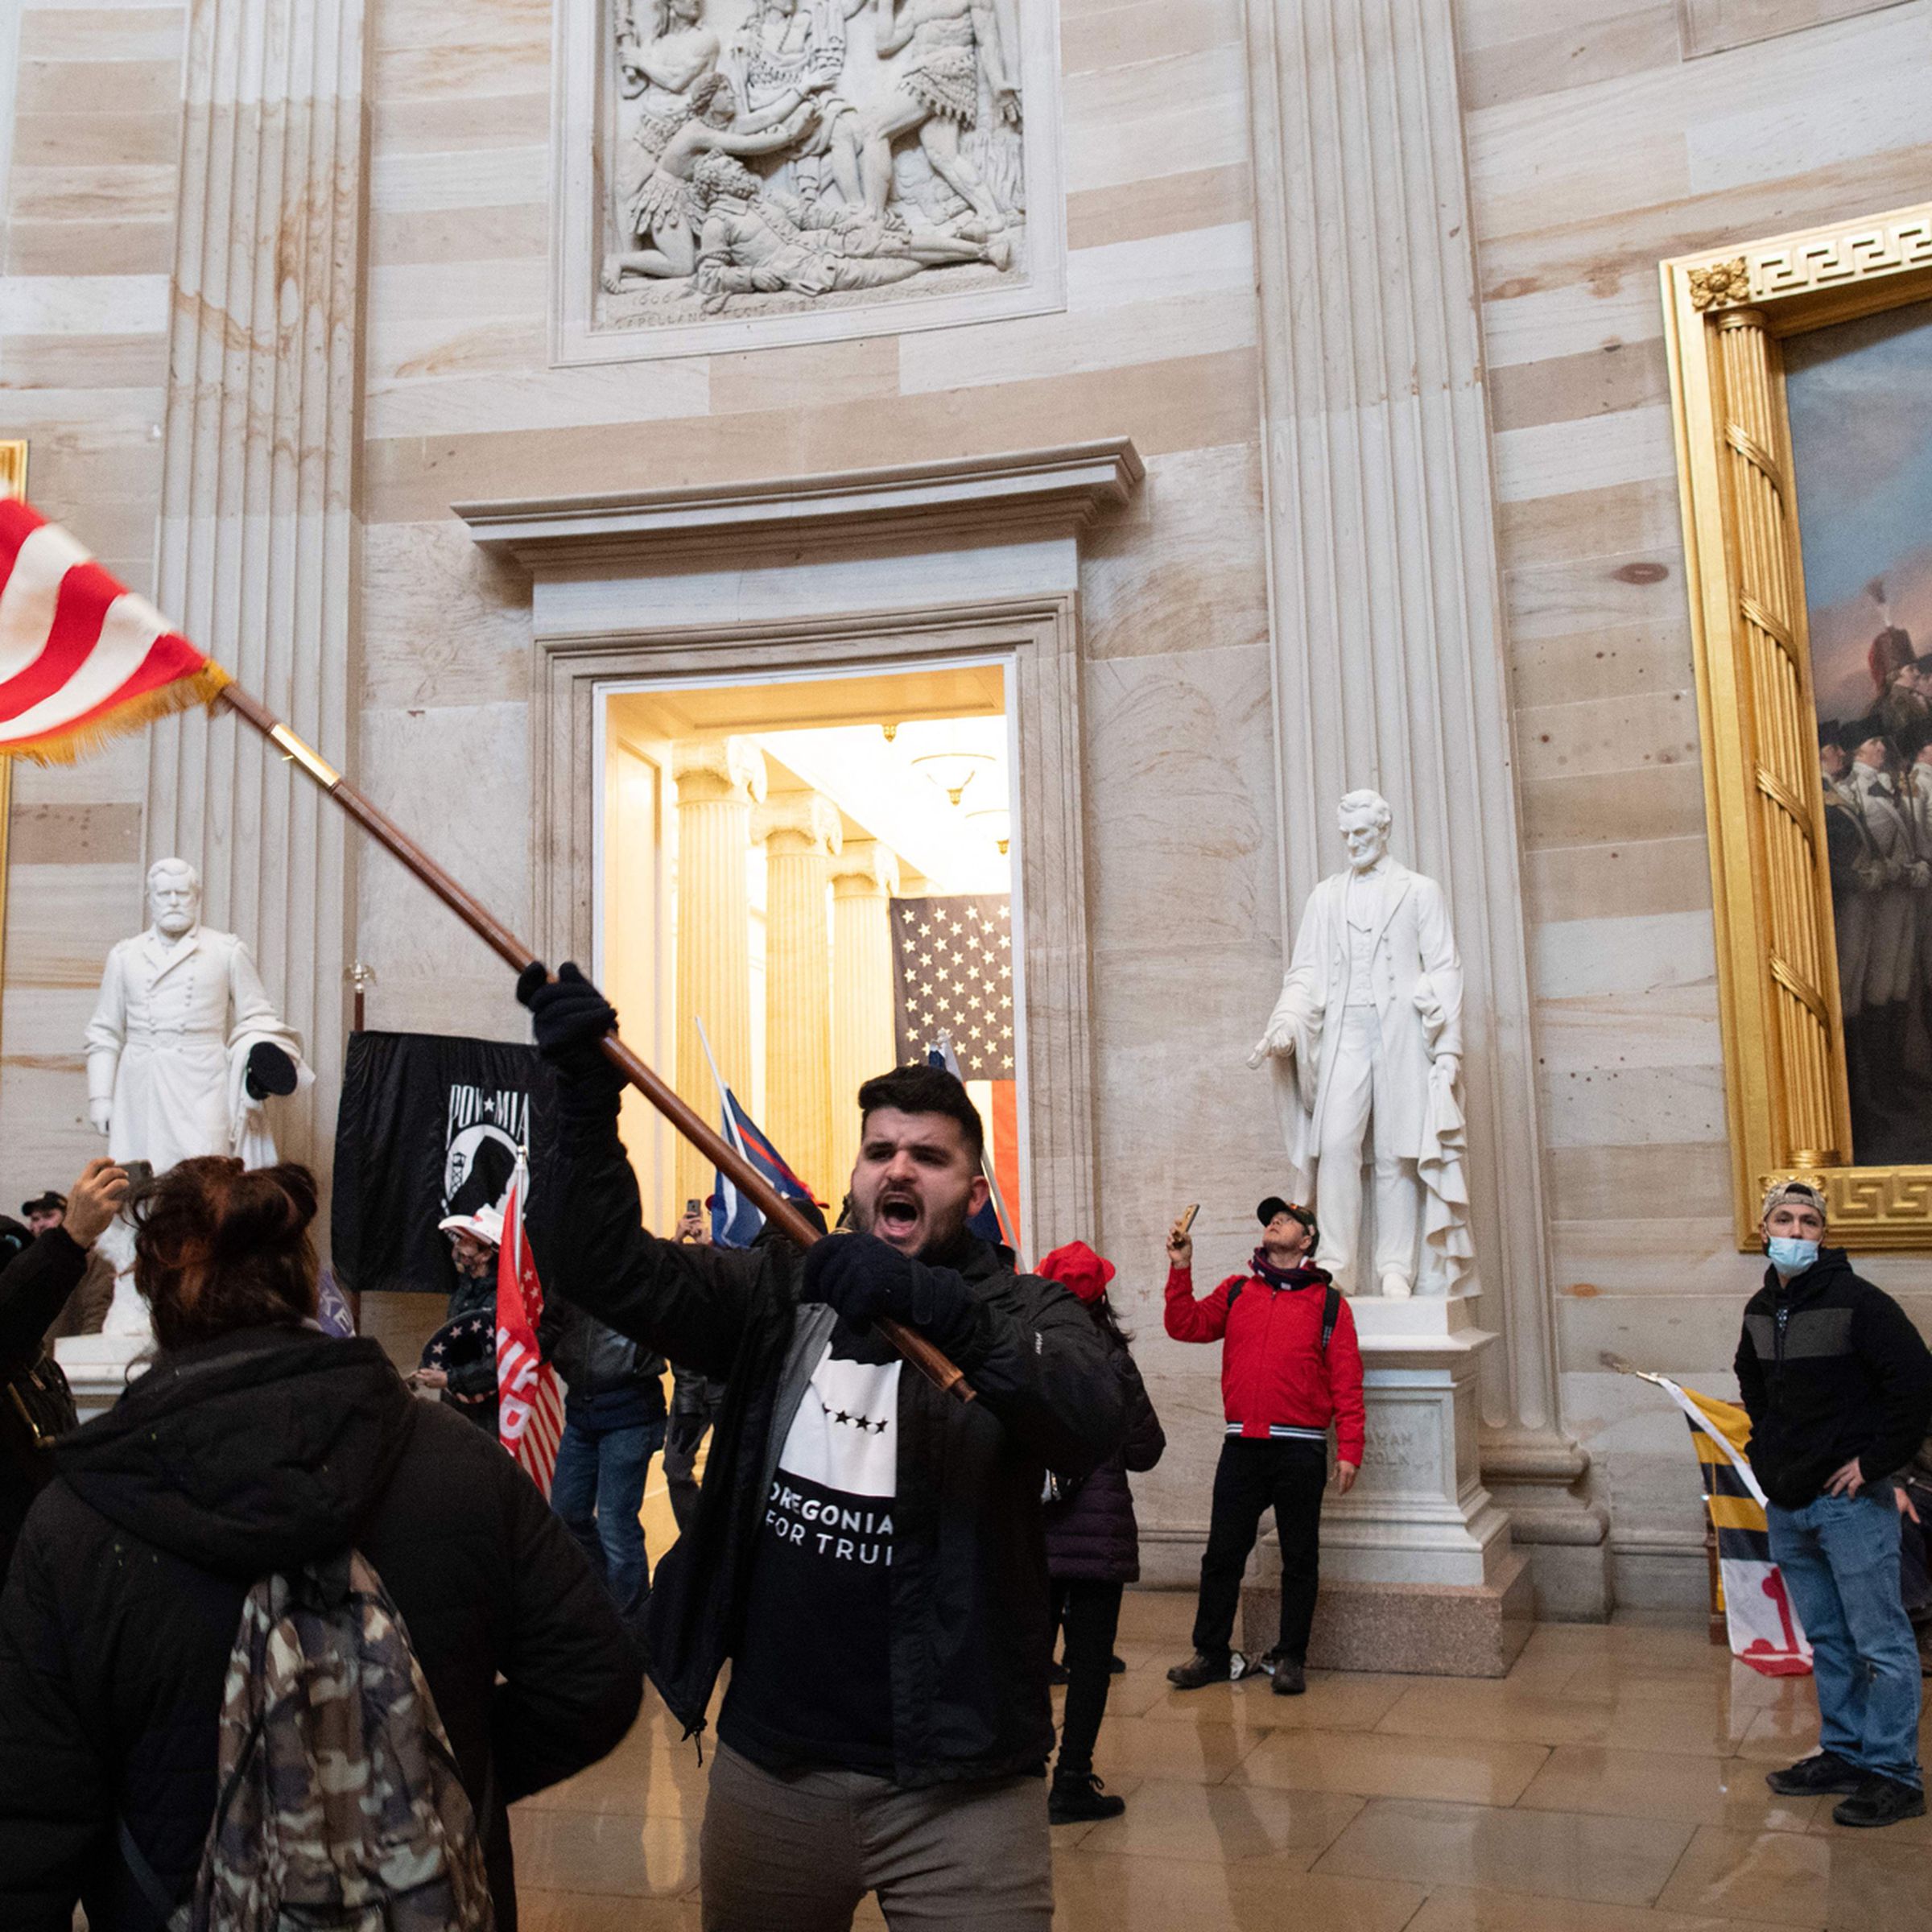 Supporters of US President Donald Trump protest inside the US Capitol on January 6th, 2021, in Washington, DC. Demonstrators breached security and entered the Capitol as Congress debated the 2020 presidential Electoral Vote Certification. 